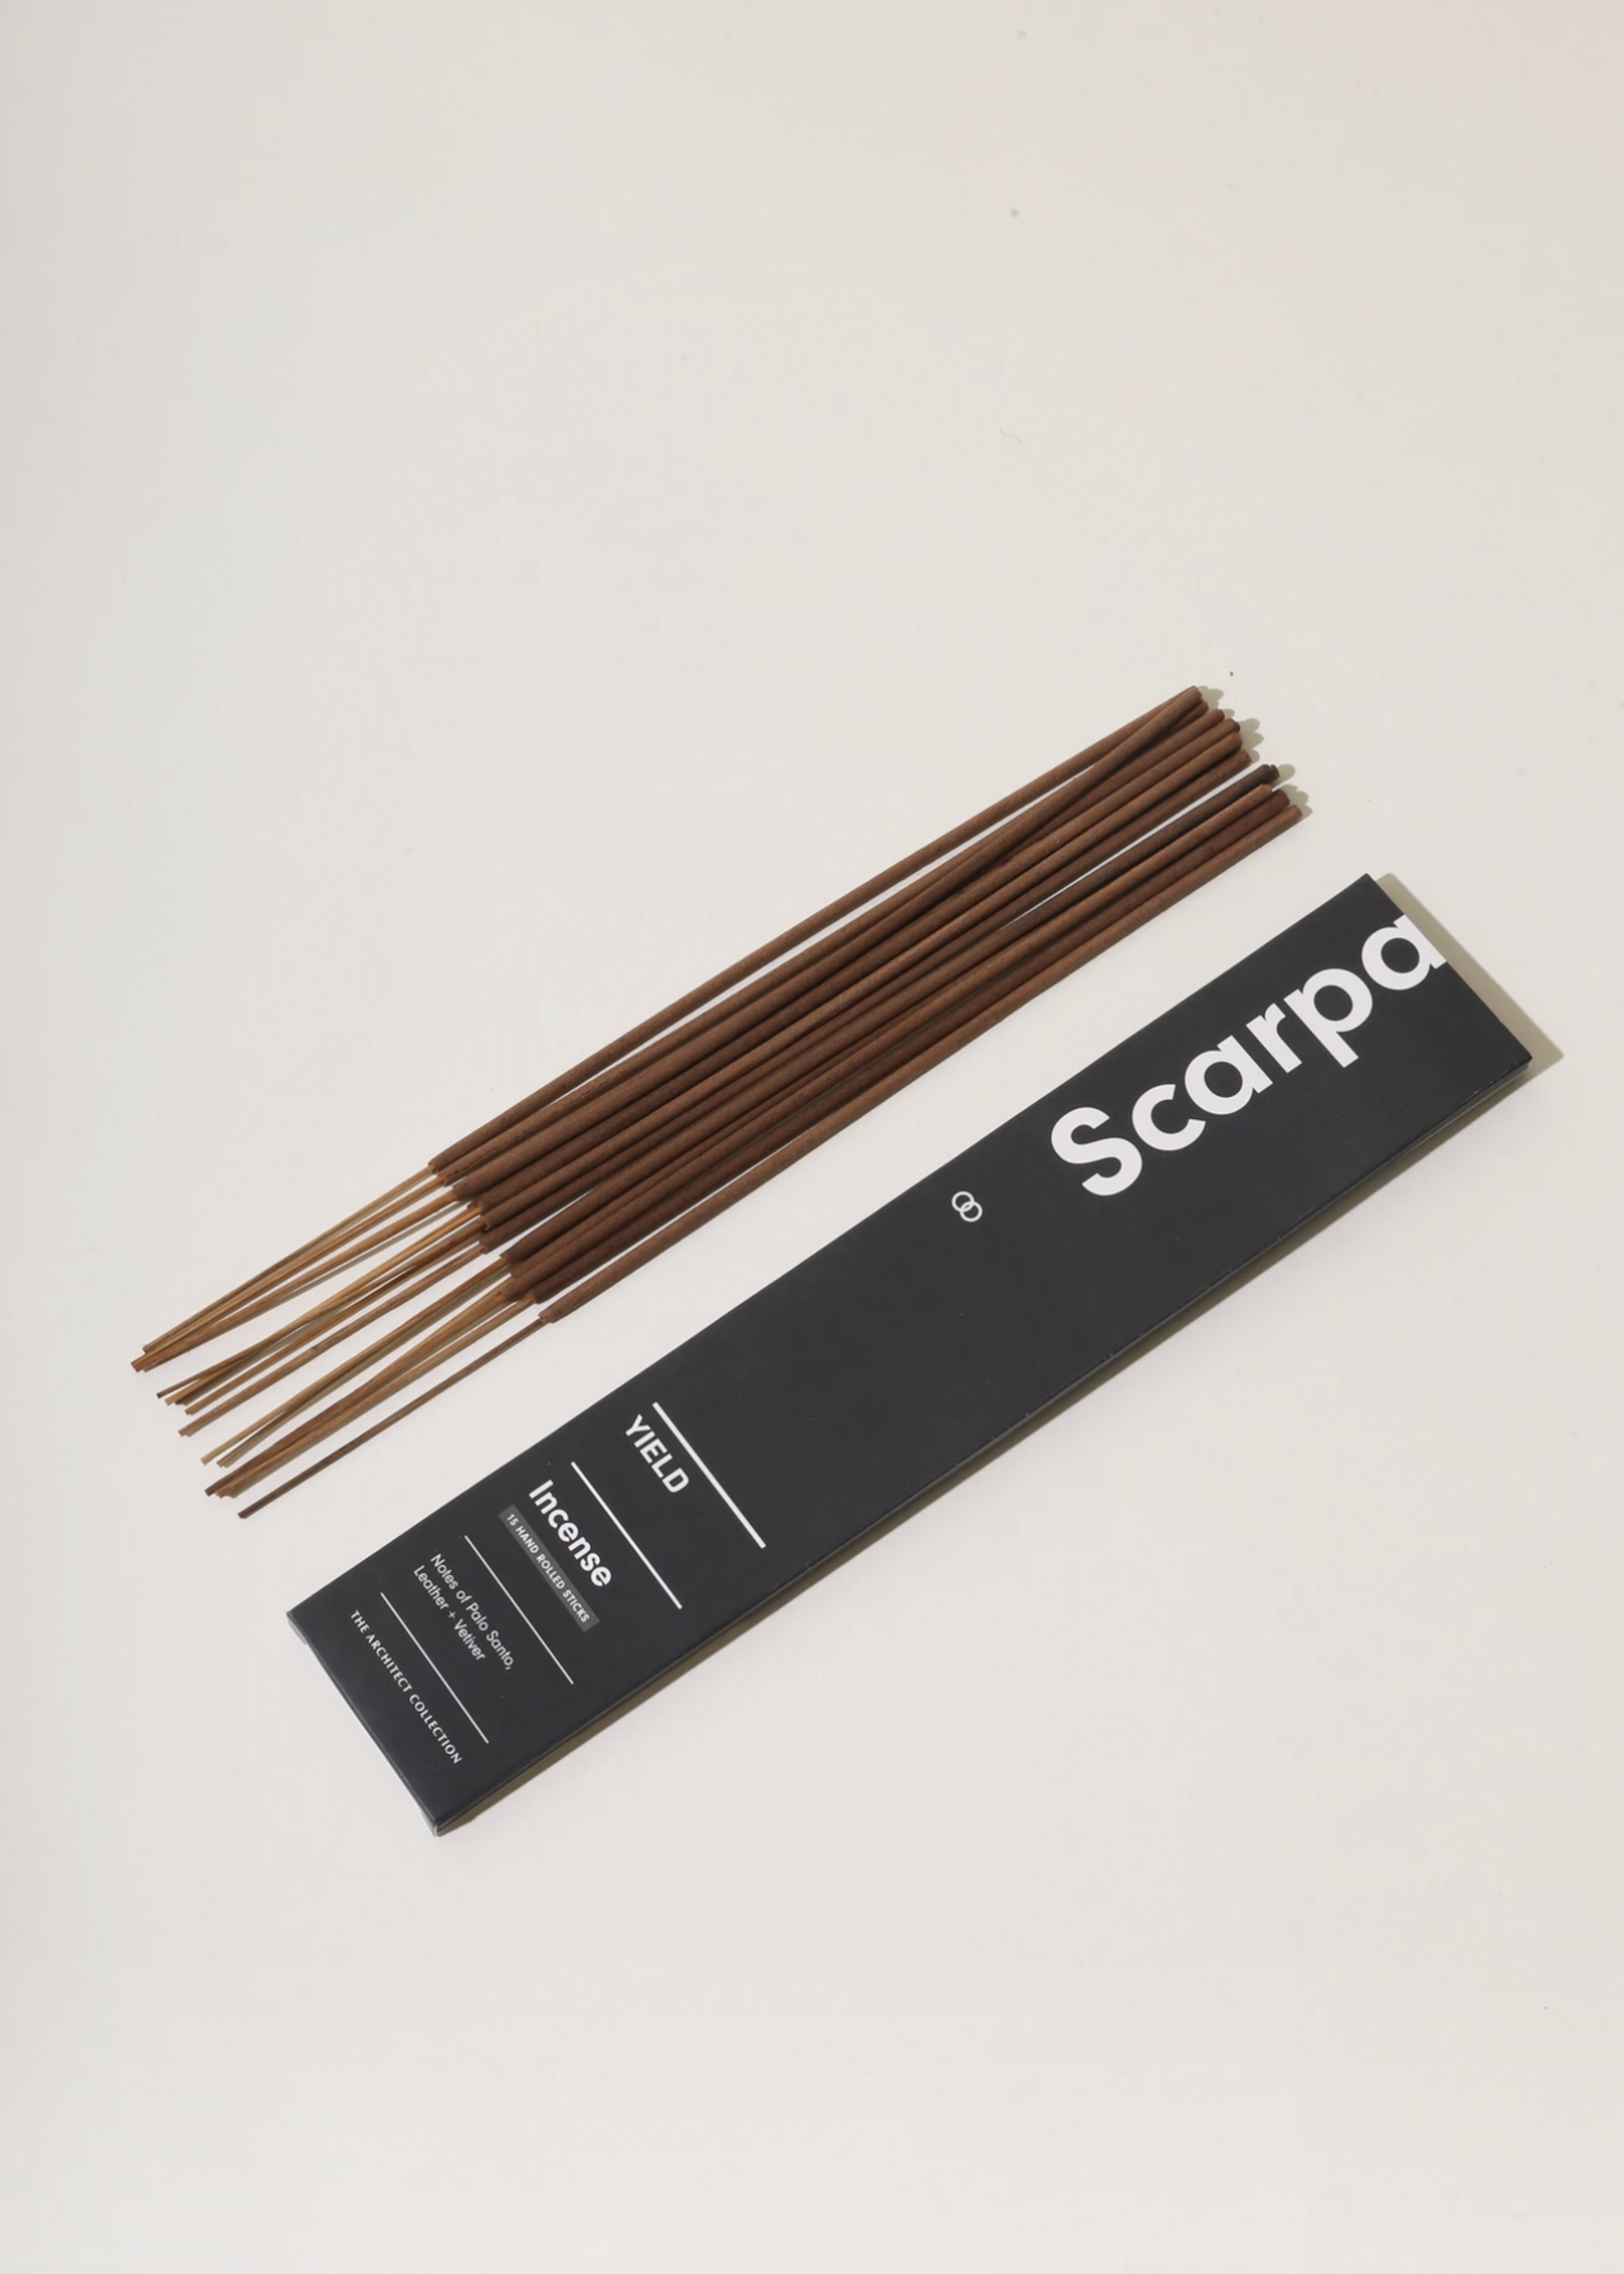 Yield Design Incense Sticks by Yield